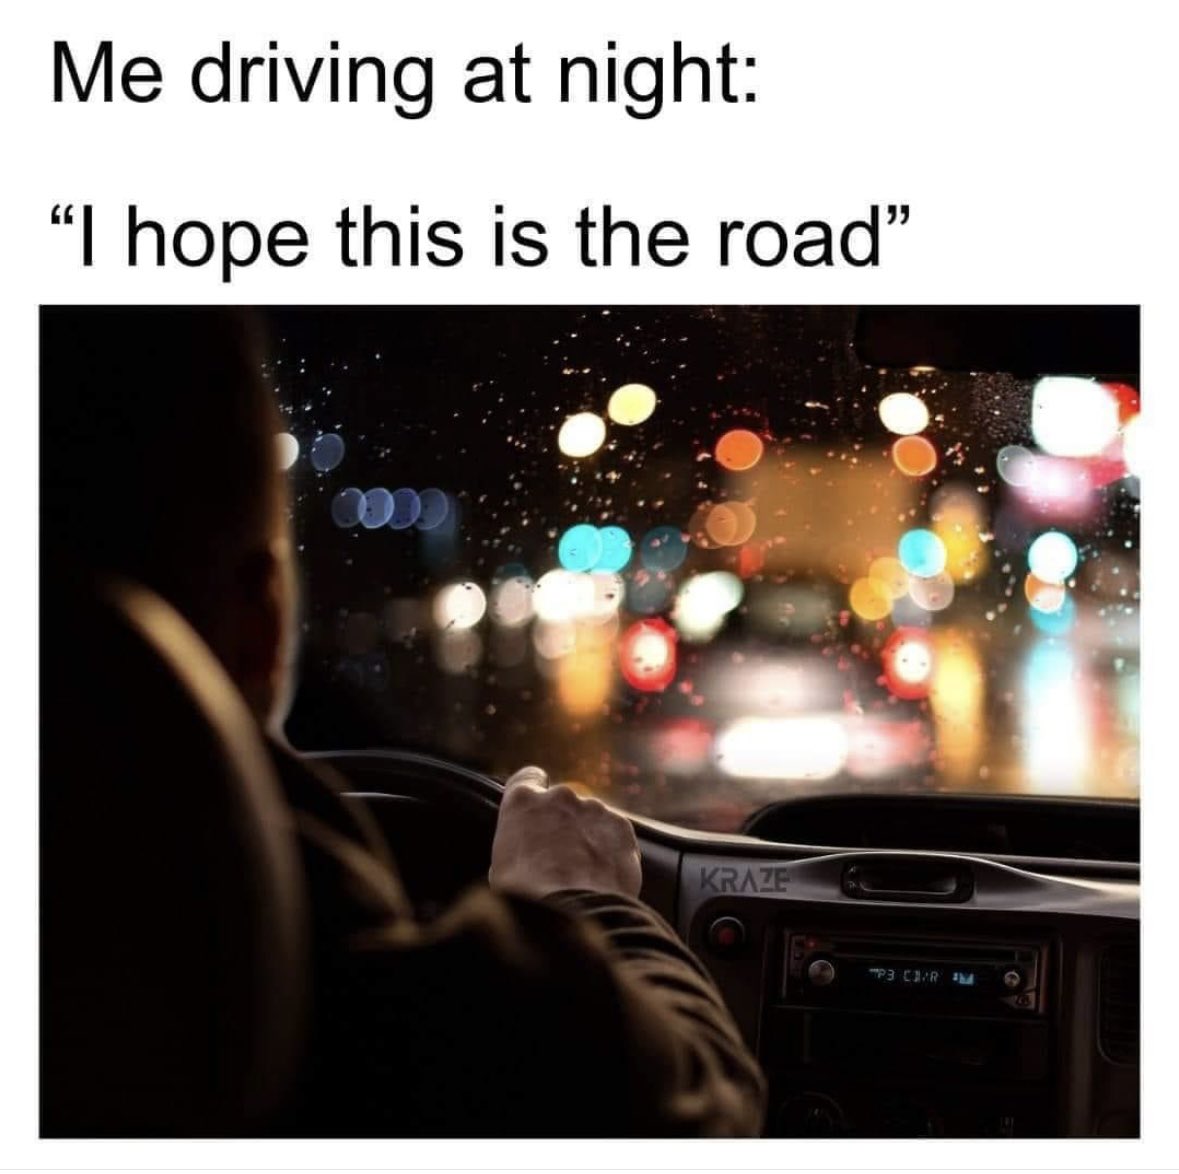 🤦🏽‍♀️🤦🏽‍♀️😂😂😂🤪Who can relate to this? #drive #responsibly #checkeyes #drivesafe #lol #funny #notfunny